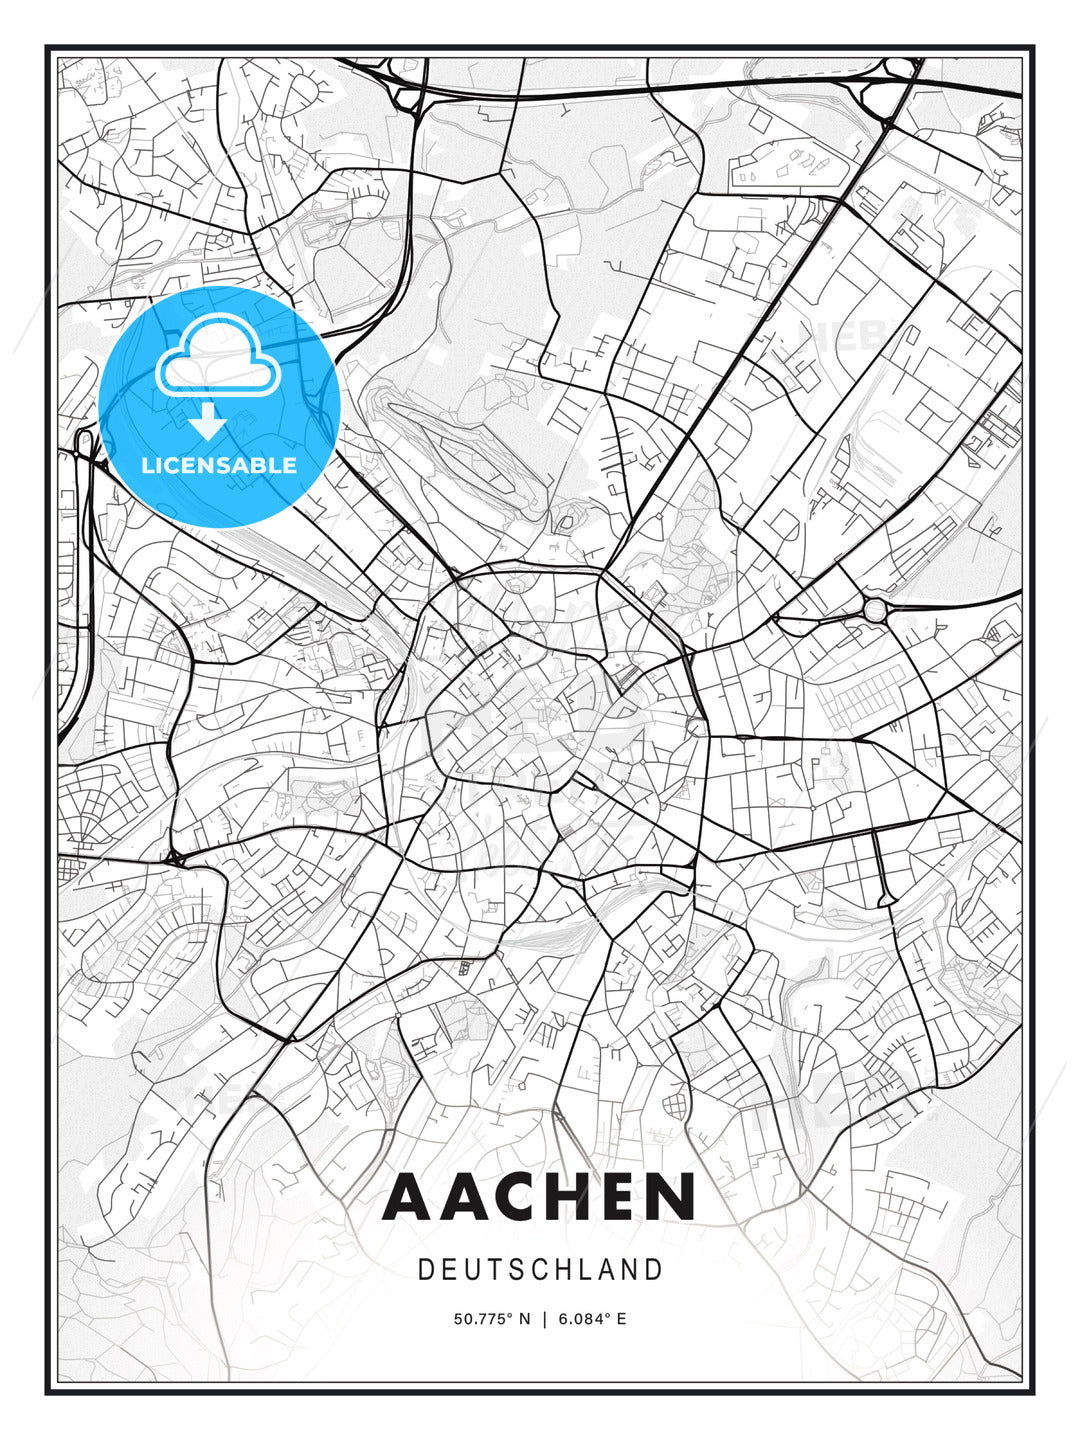 Aachen, Germany, Modern Print Template in Various Formats - HEBSTREITS Sketches